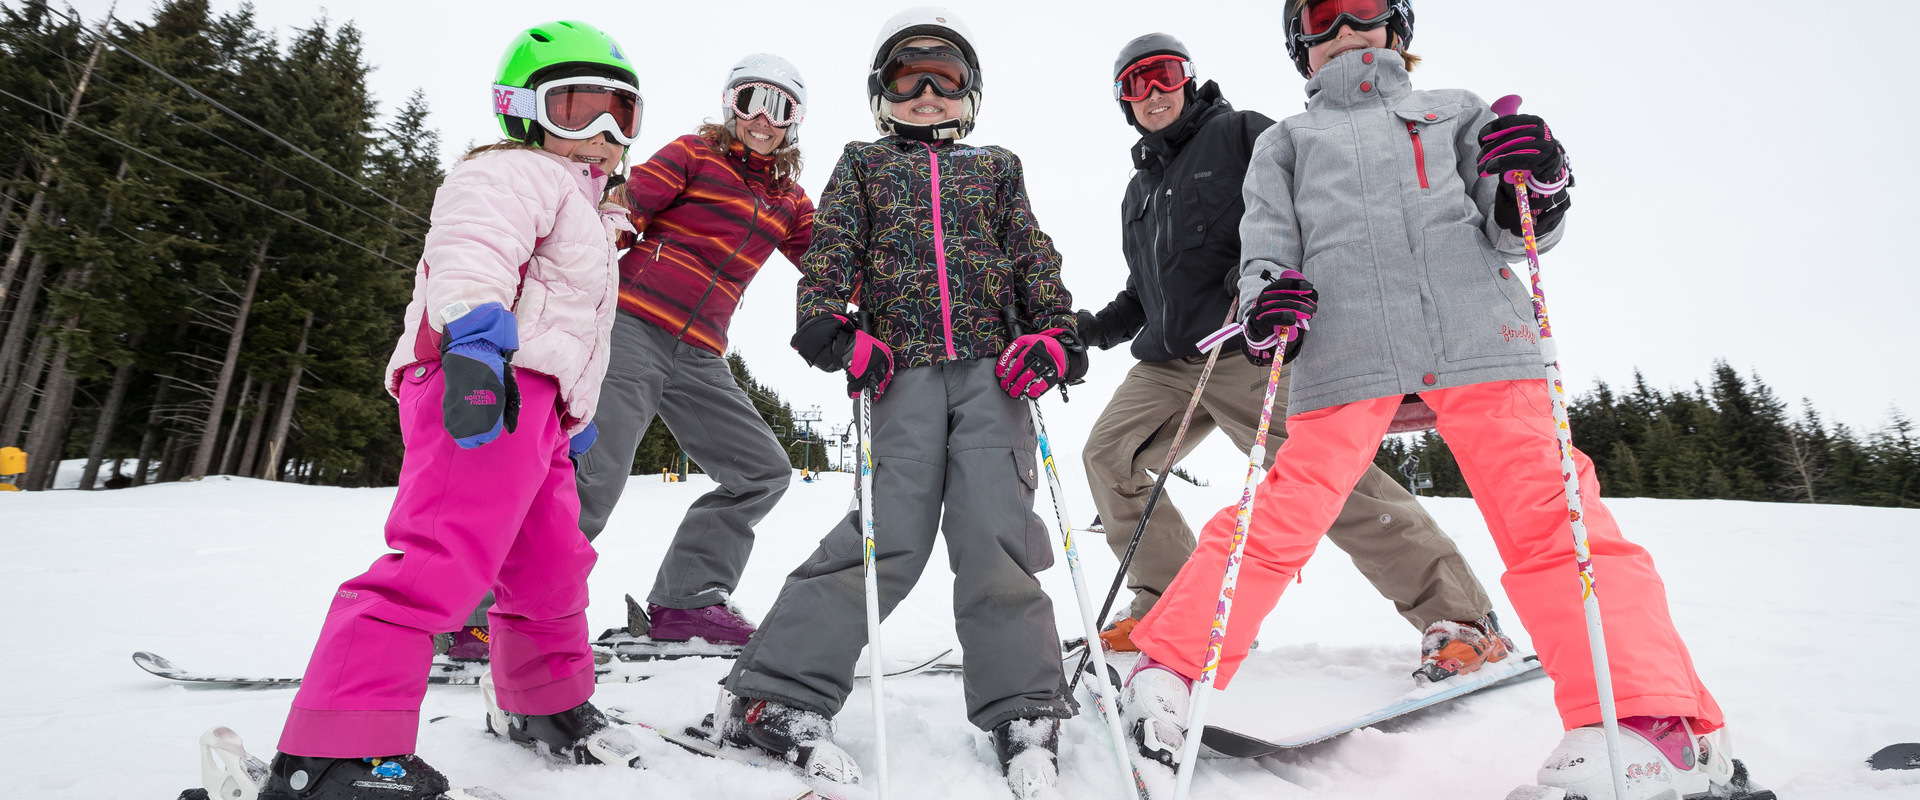 Celebrate Family Day at Grouse Mountain